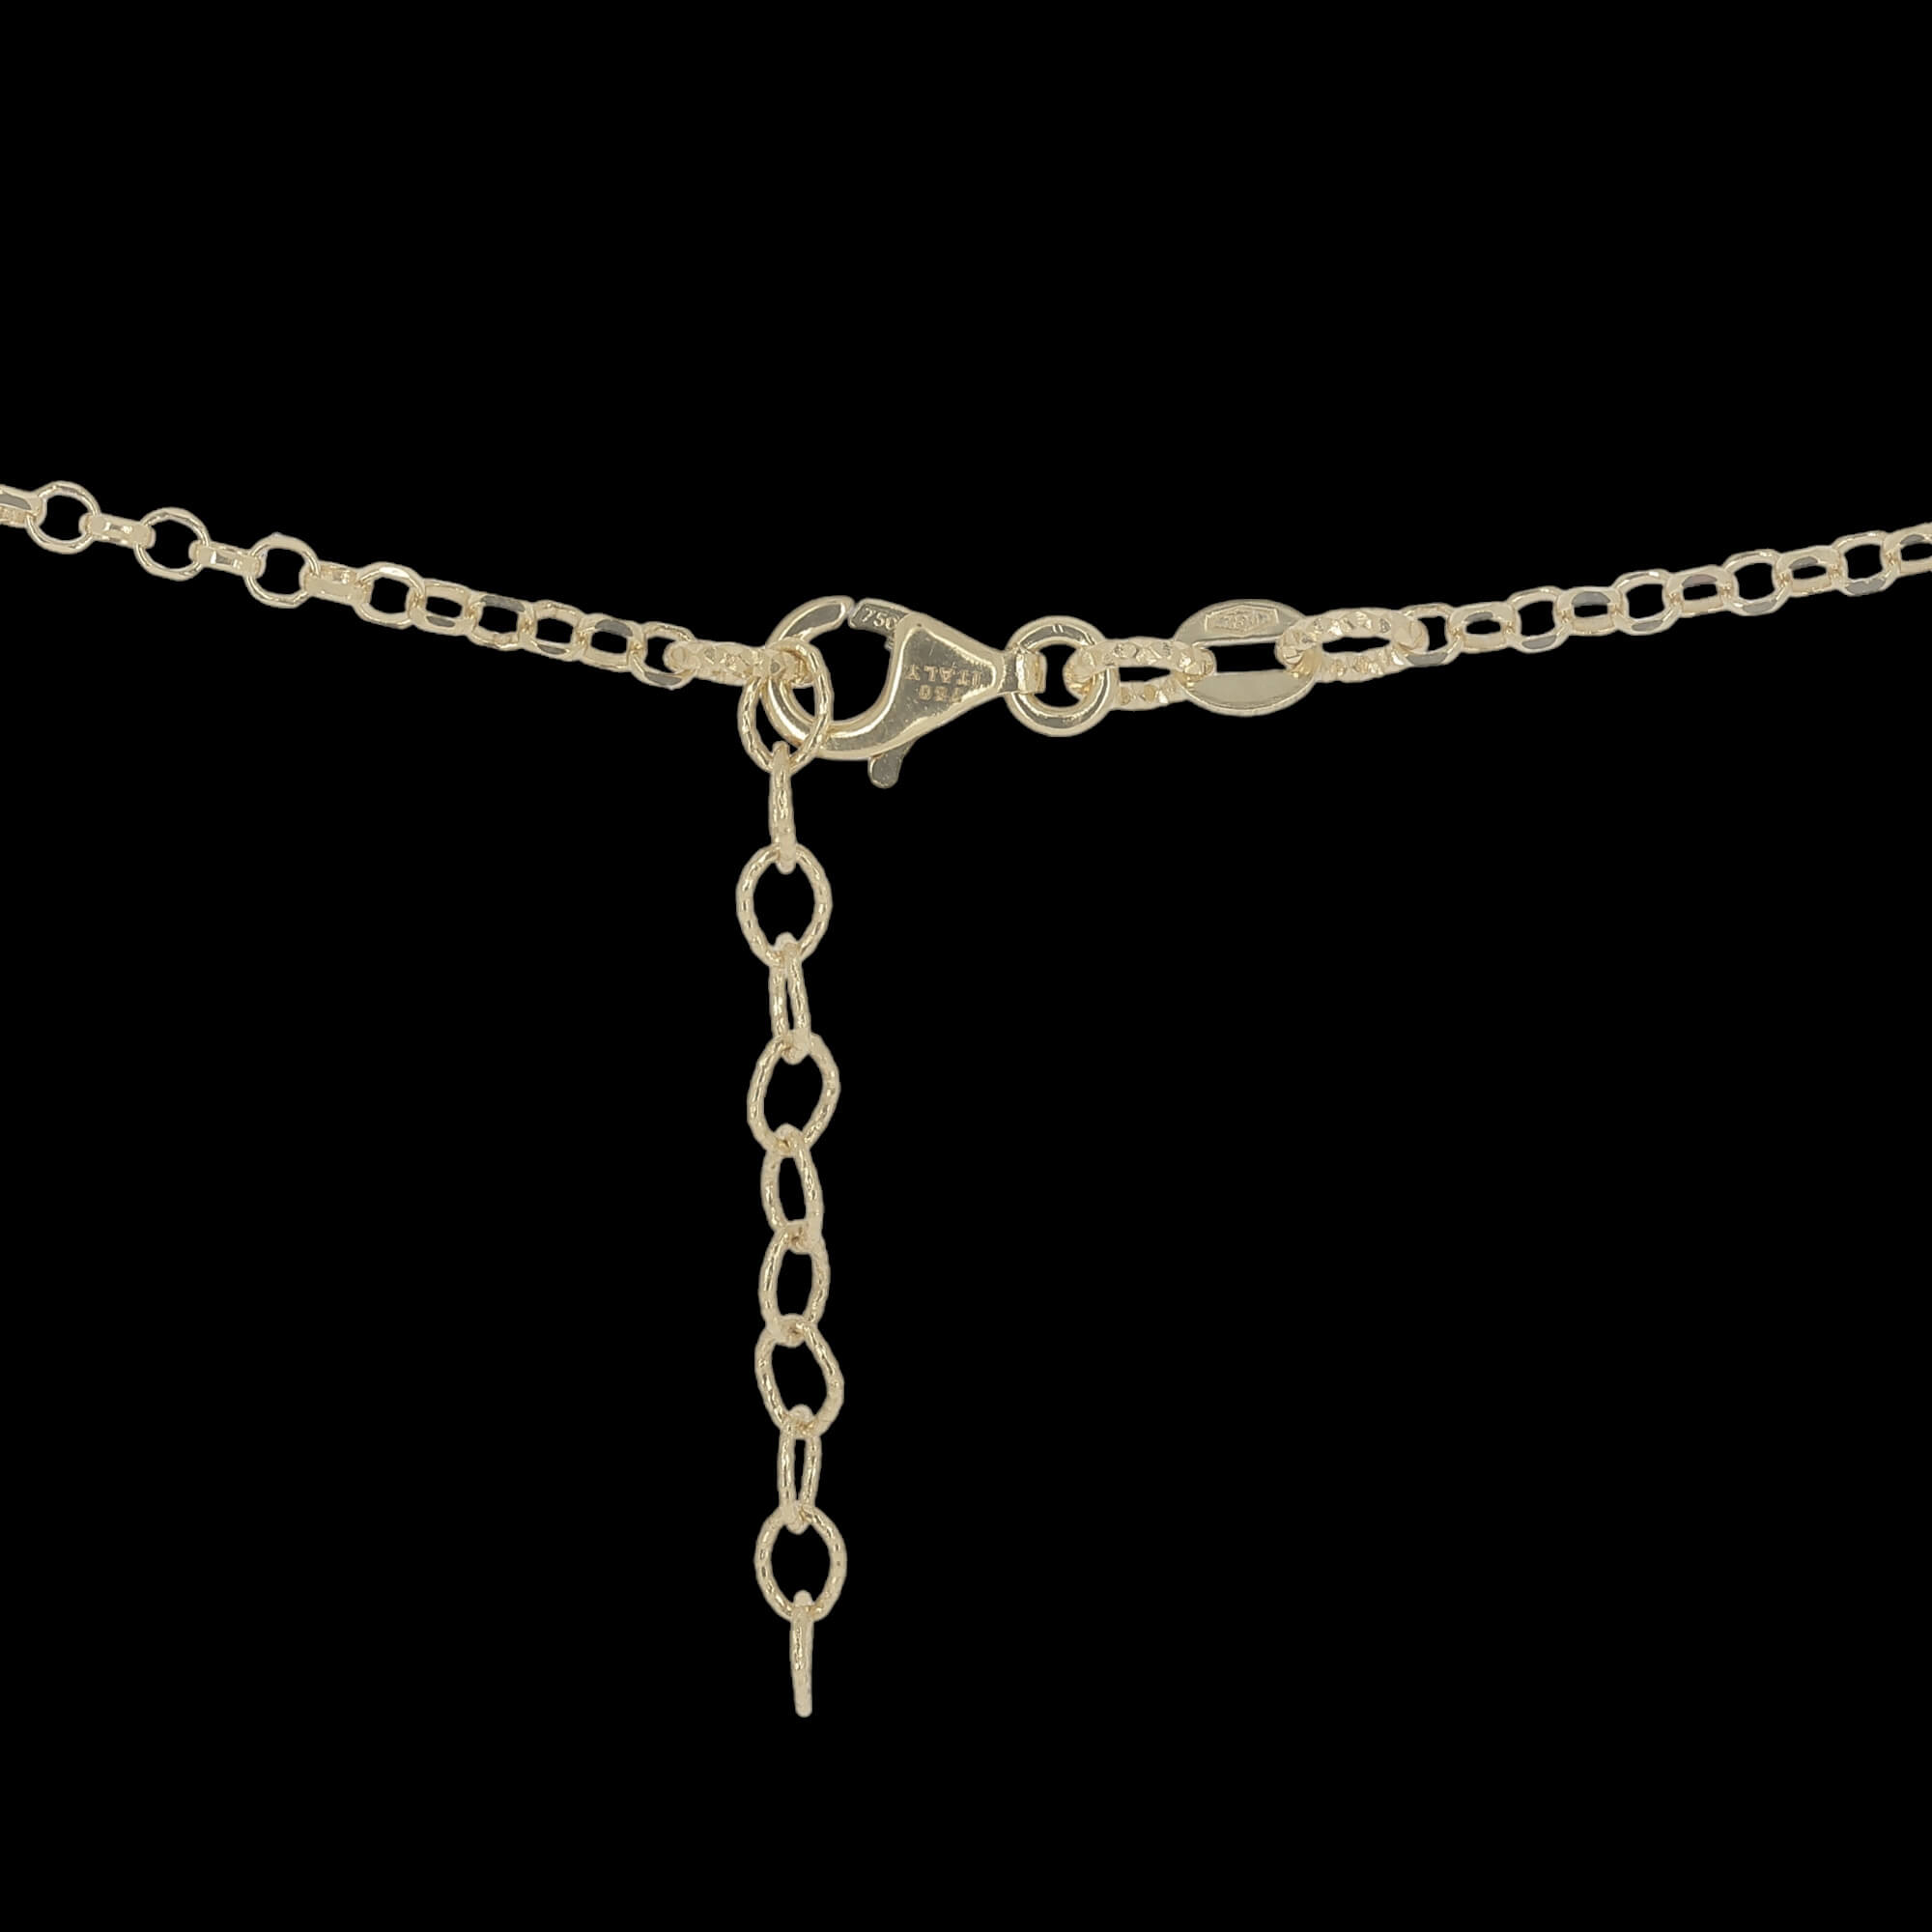 Chic necklace with refined branches of 18kt gold